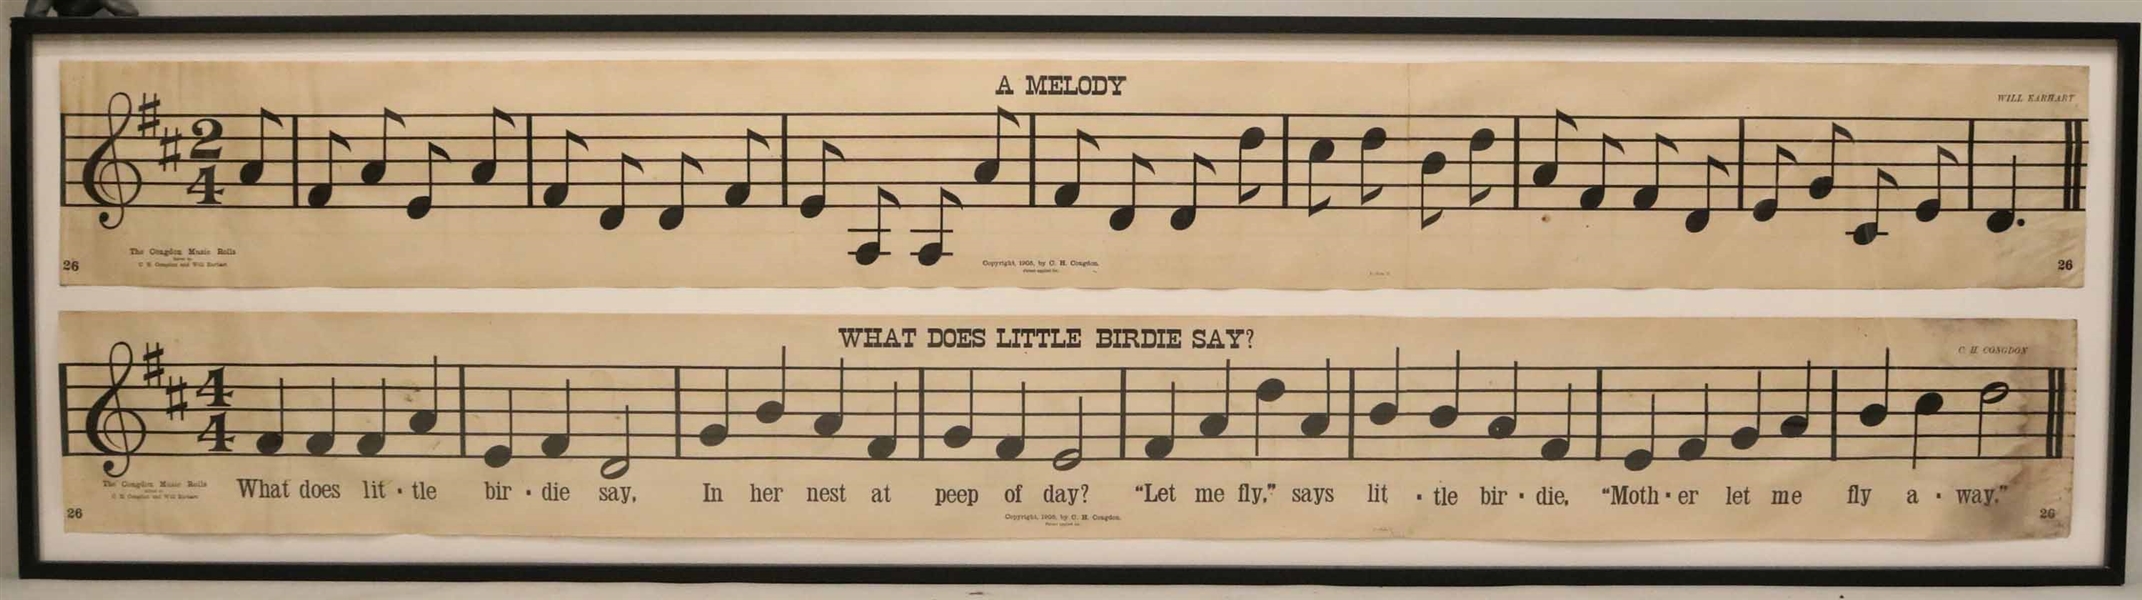 Framed Score for "A Melody" Will Earnhart